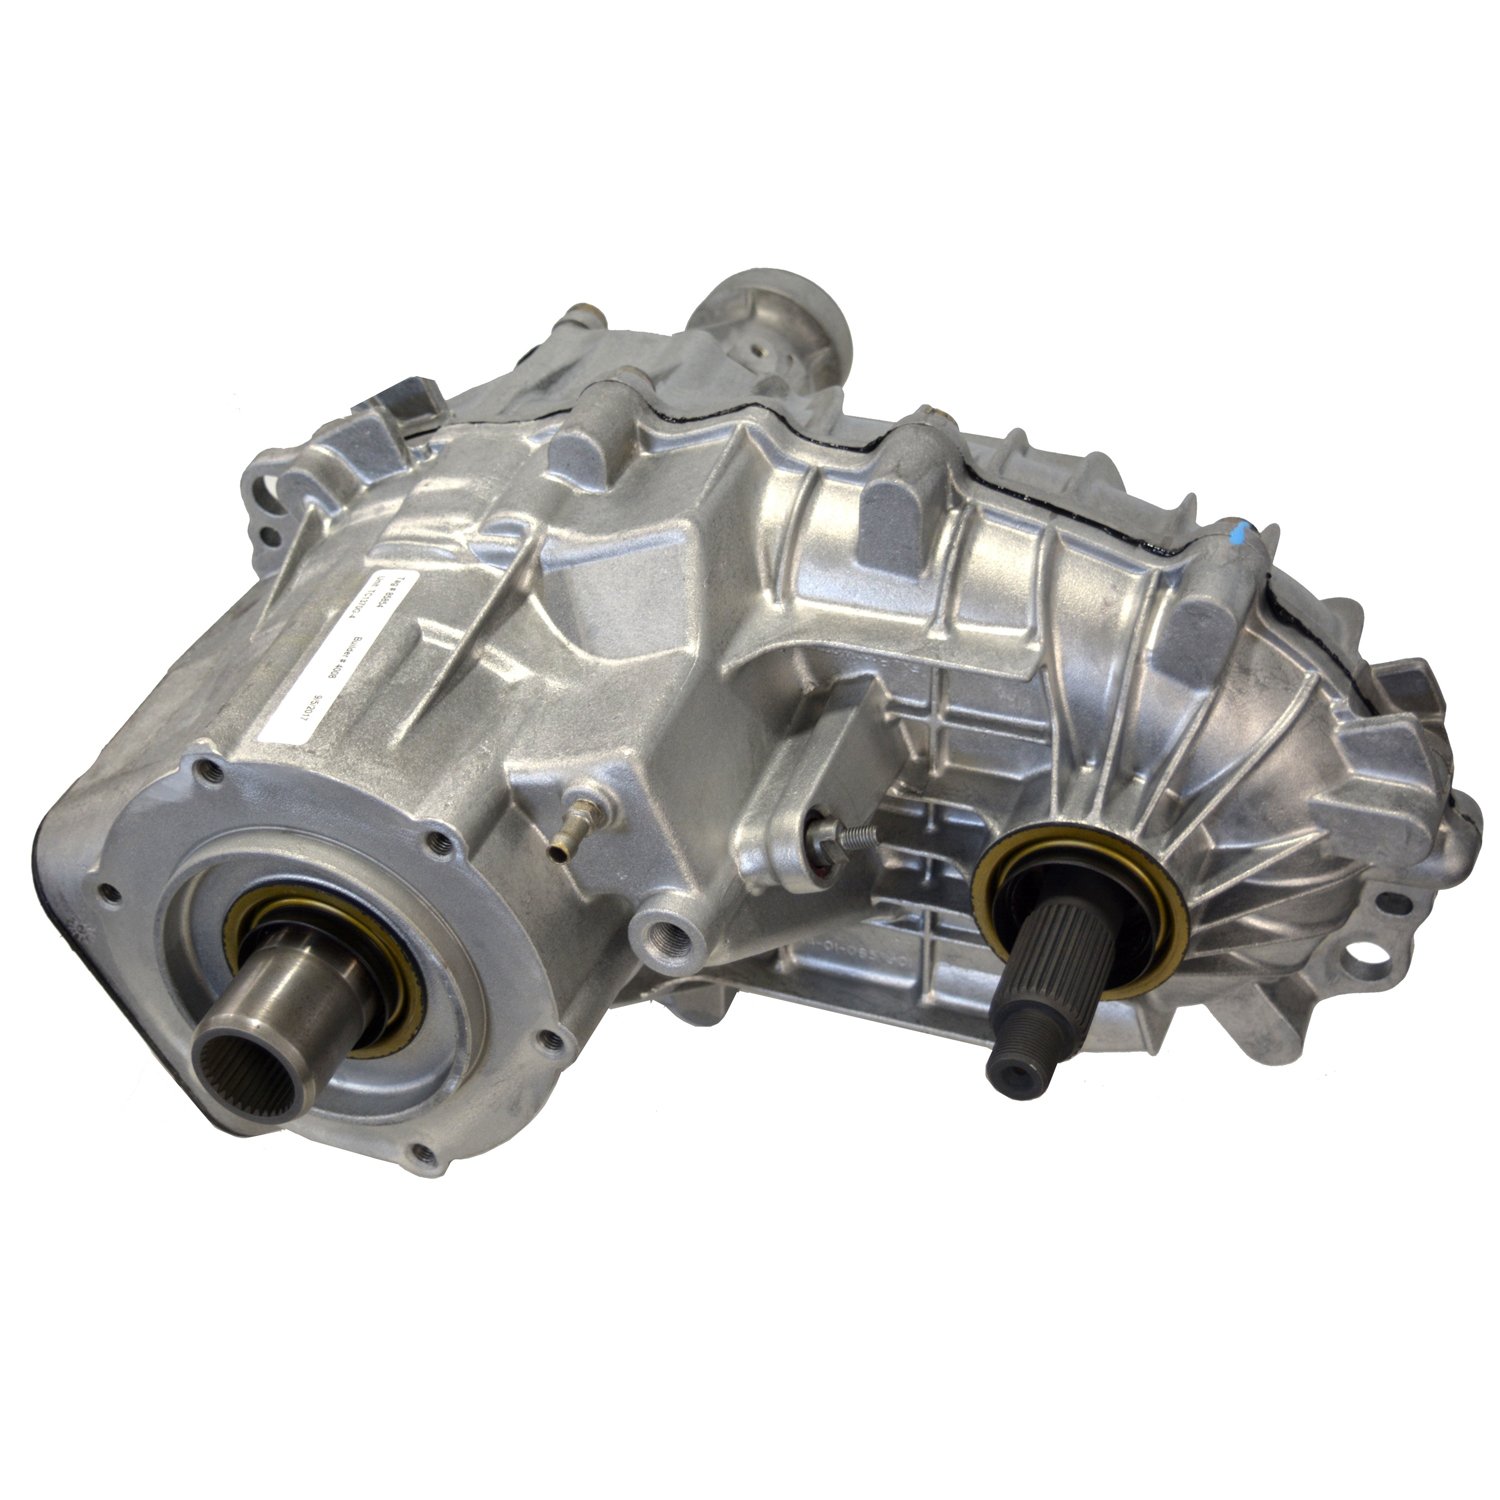 Remanufactured BW1370 & BW4401 Transfer Case for GM